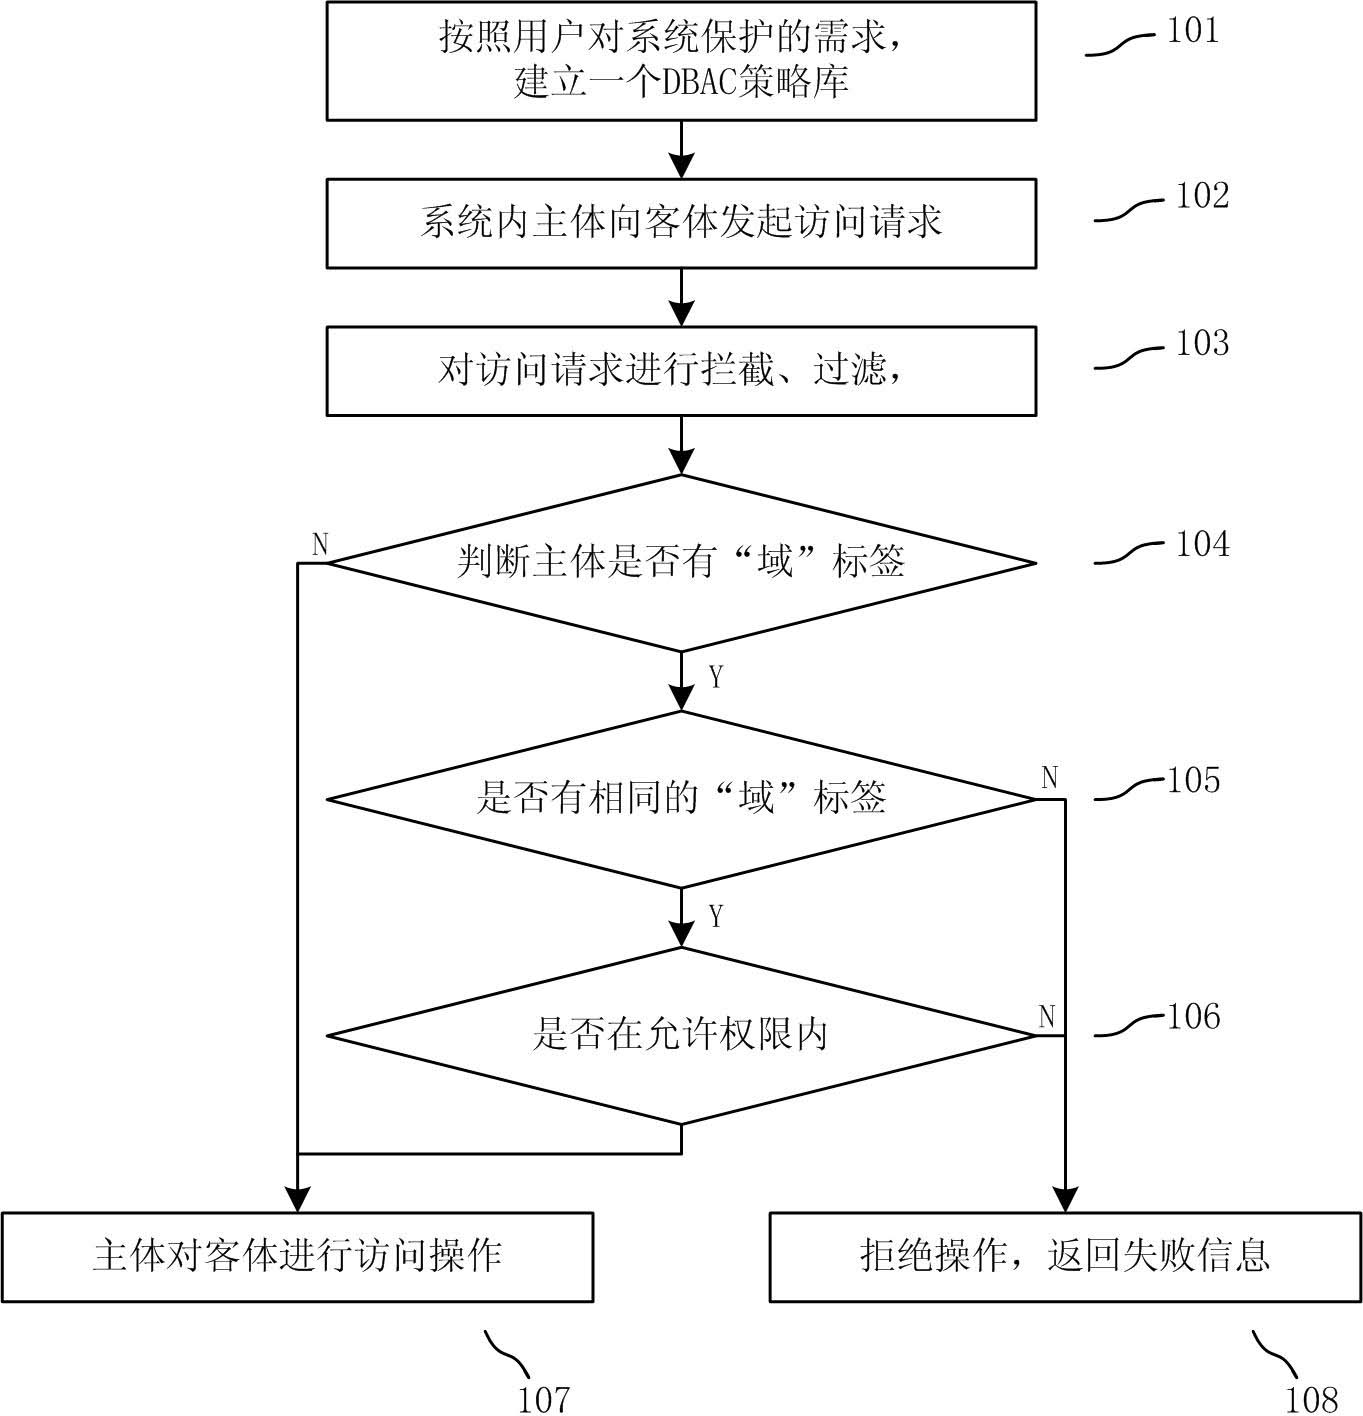 Domain-based access control method and system